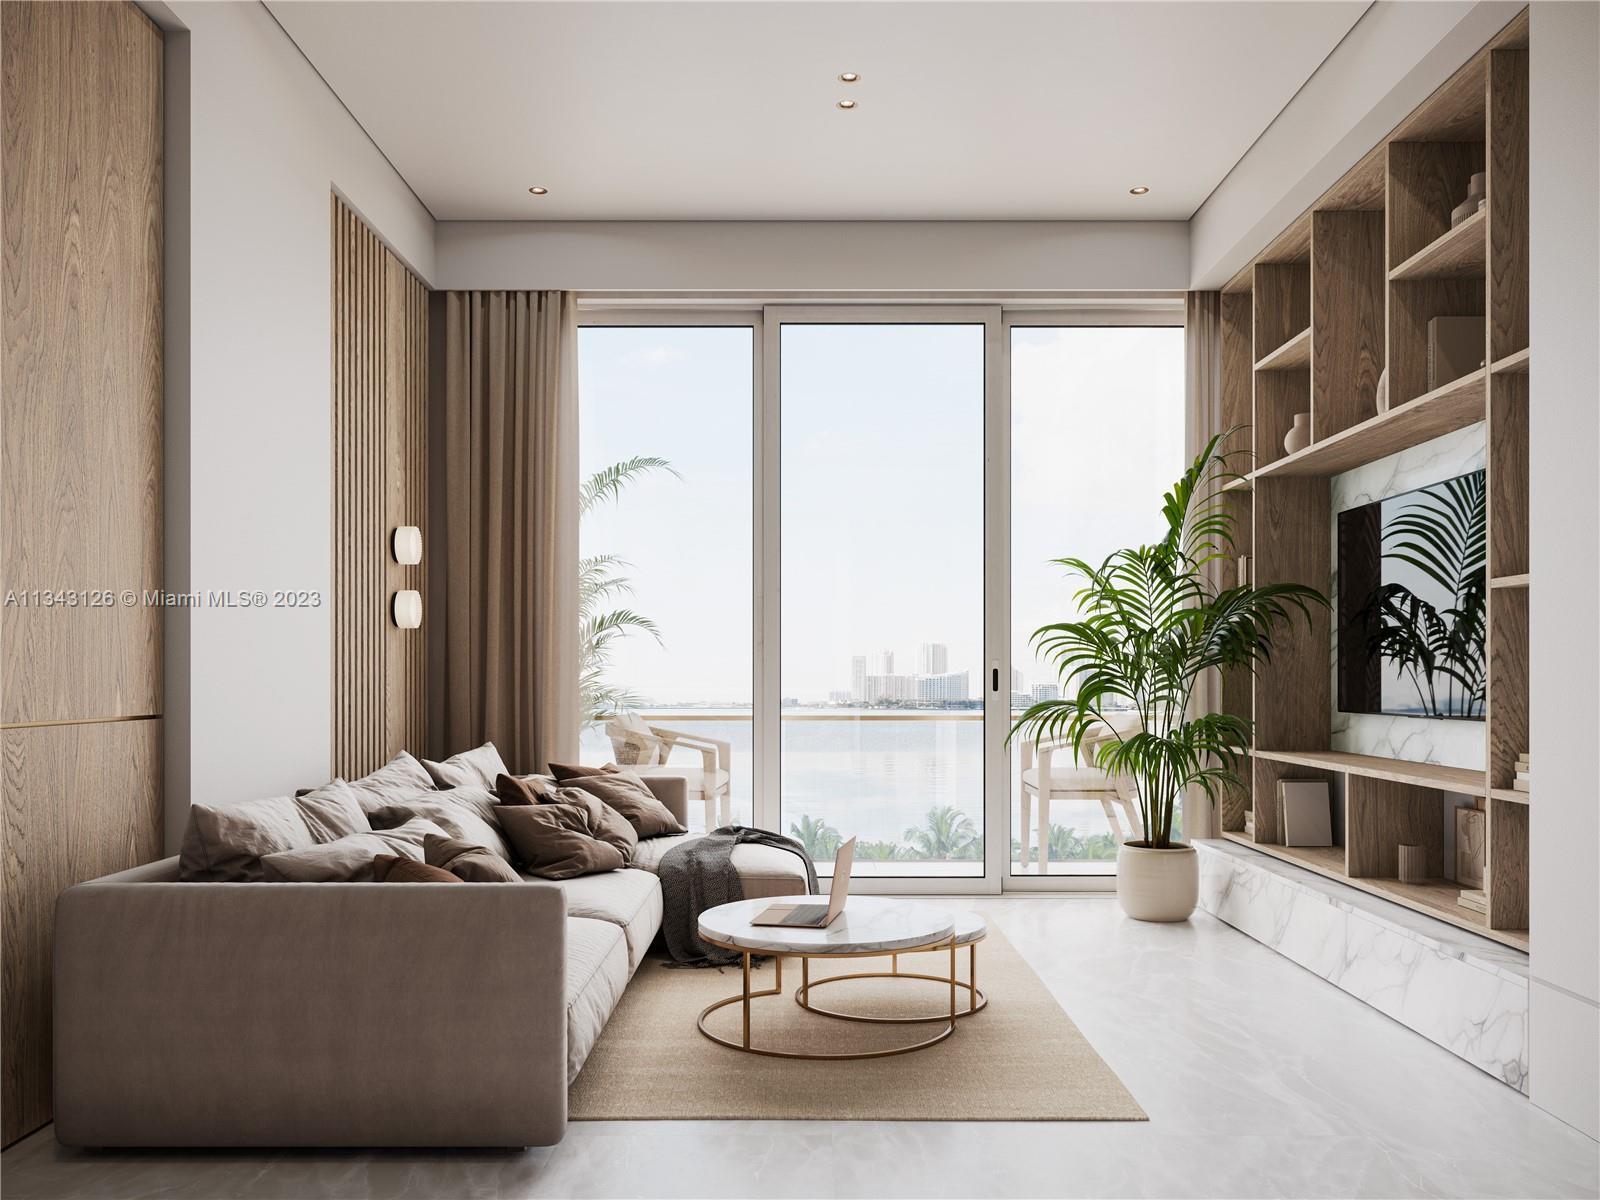 Positioned in miami’s most magnetic locale, we introduce Vida-Edgewater Residences, with a vibrant a